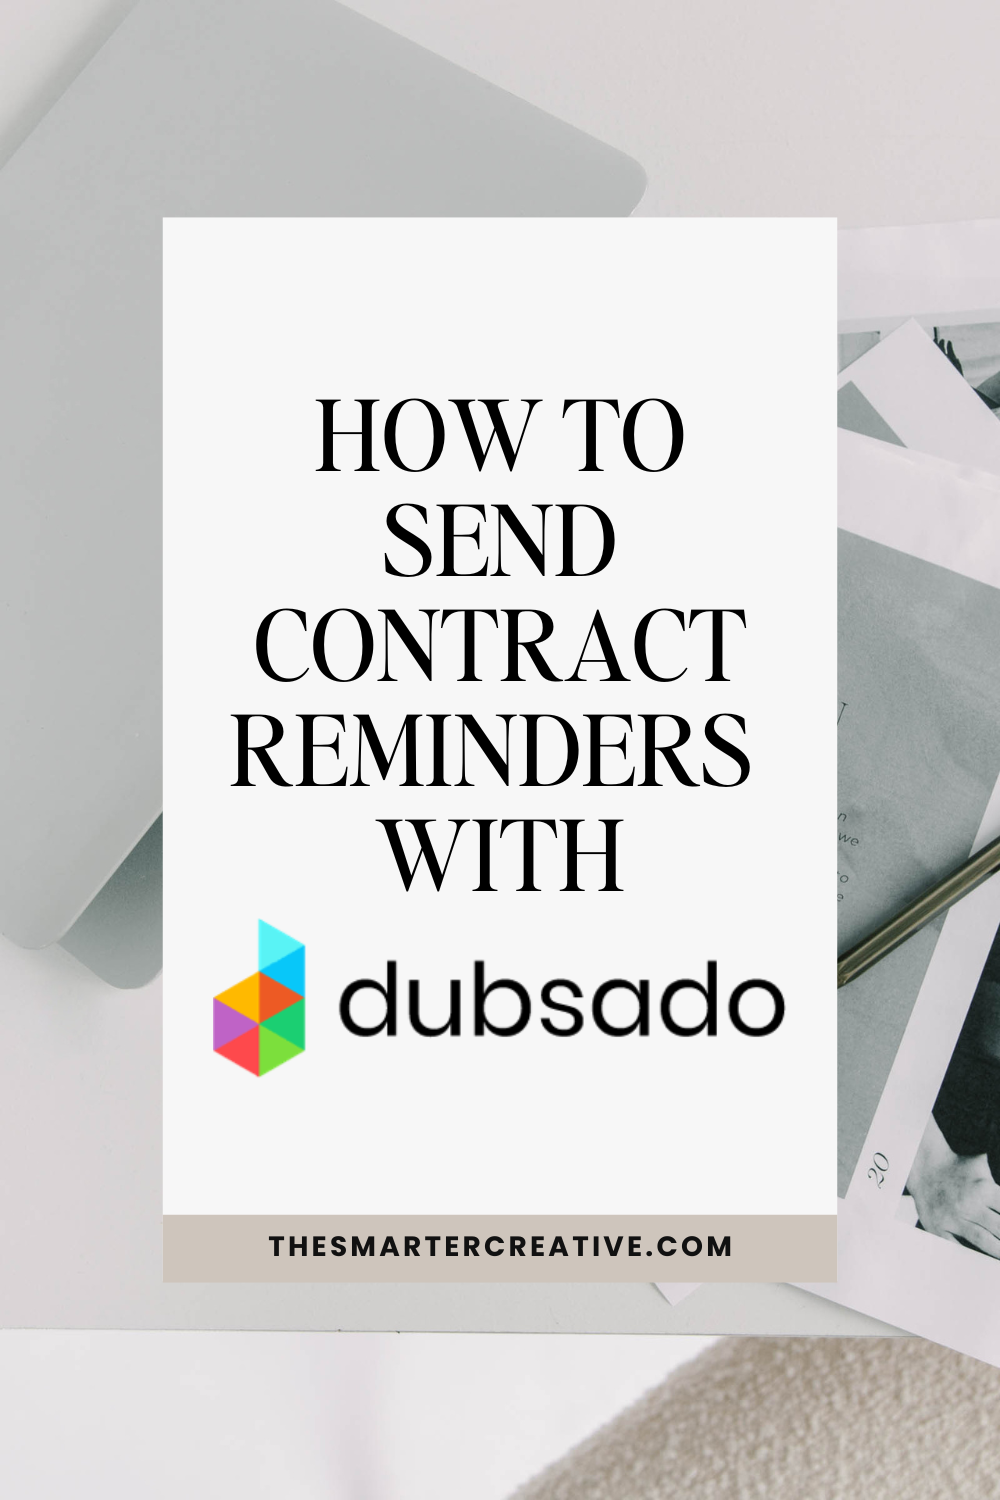 HOW TO SEND CONTRACT REMINDERS WITH DUBSADO